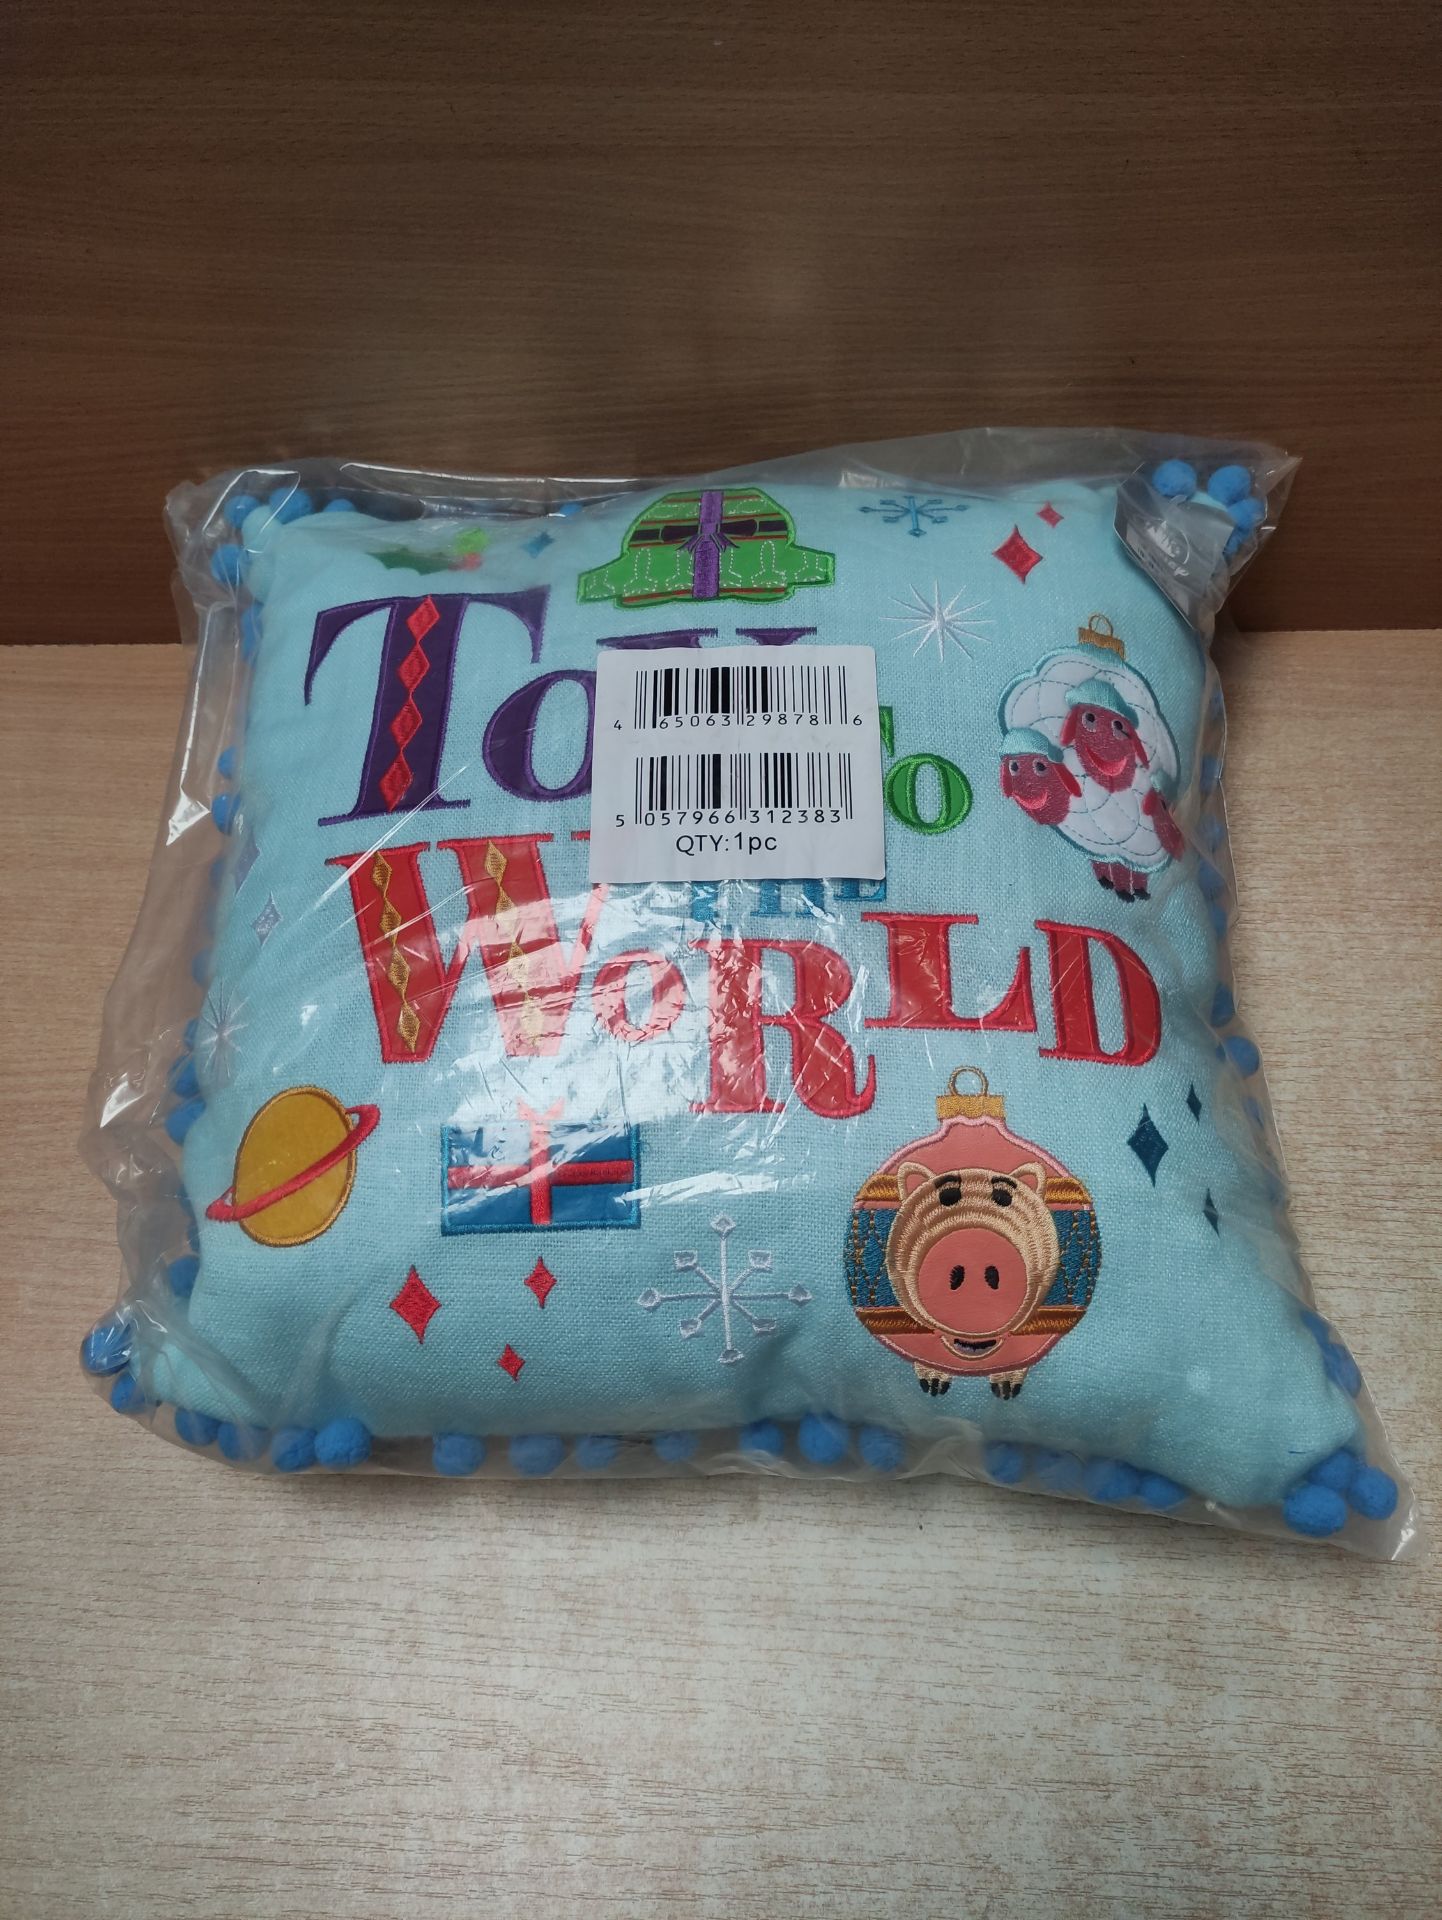 RRP £19.80 BRAND NEW STOCK Disney Toy To The World Cushion - Image 3 of 3